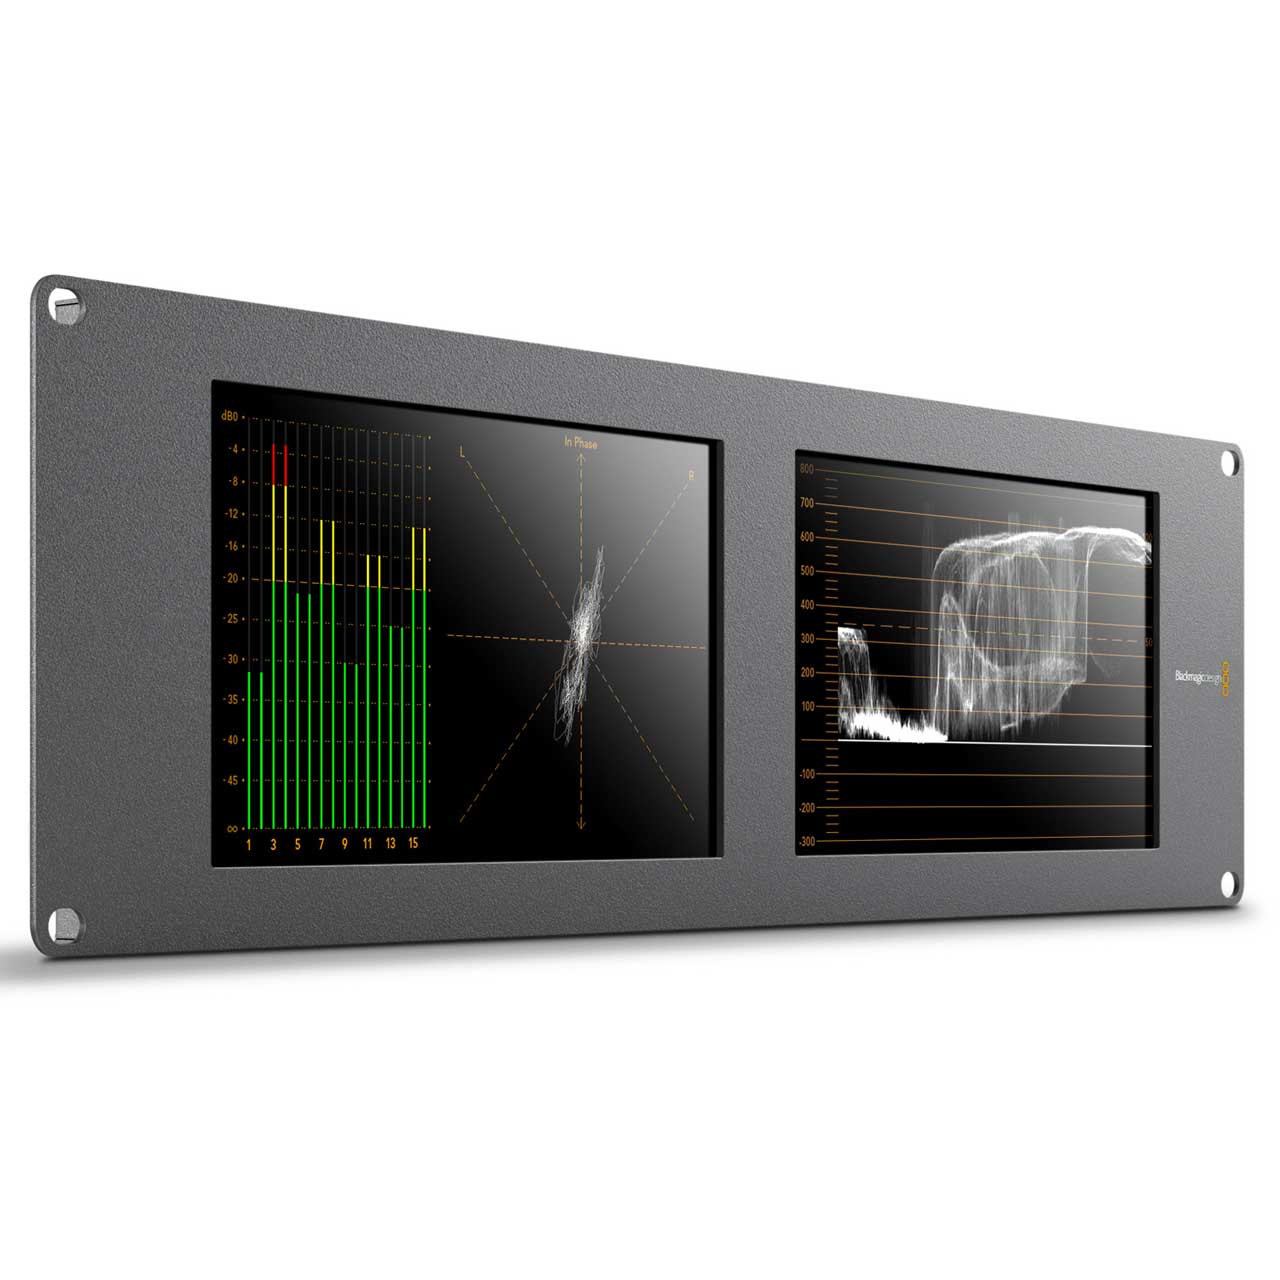 Blackmagic Design HDL-SMTWSCOPEDUO4K2 SmartScope Duo 4K Dual 8-Inch 6G-SDI  Rack Mounted Monitors with Built-in Scopes